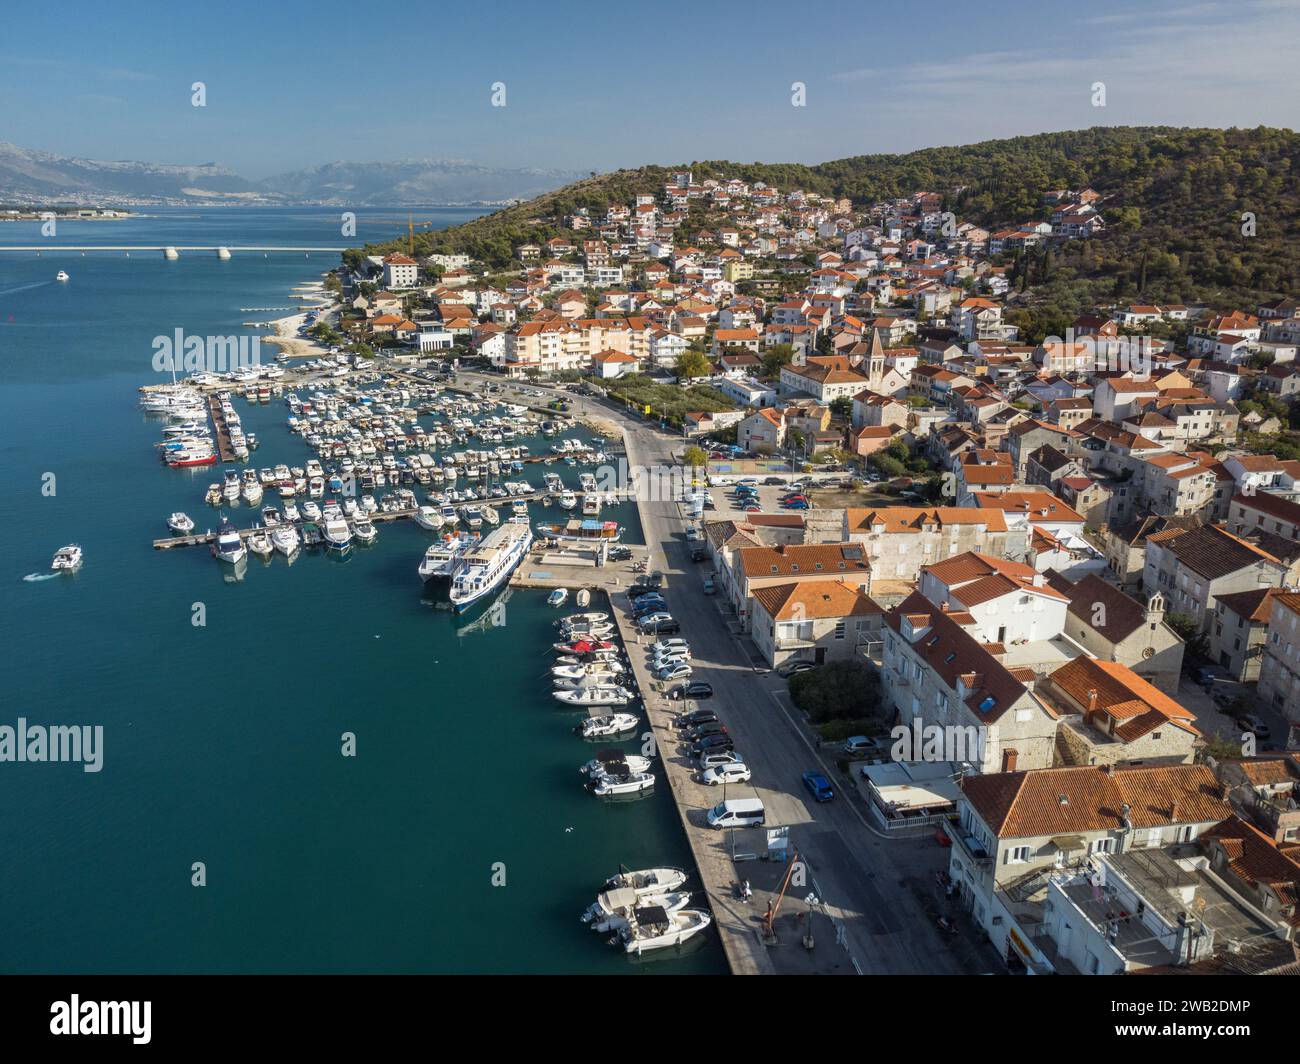 Trogir harbor and town on a sunny day from an aerial view Stock Photo